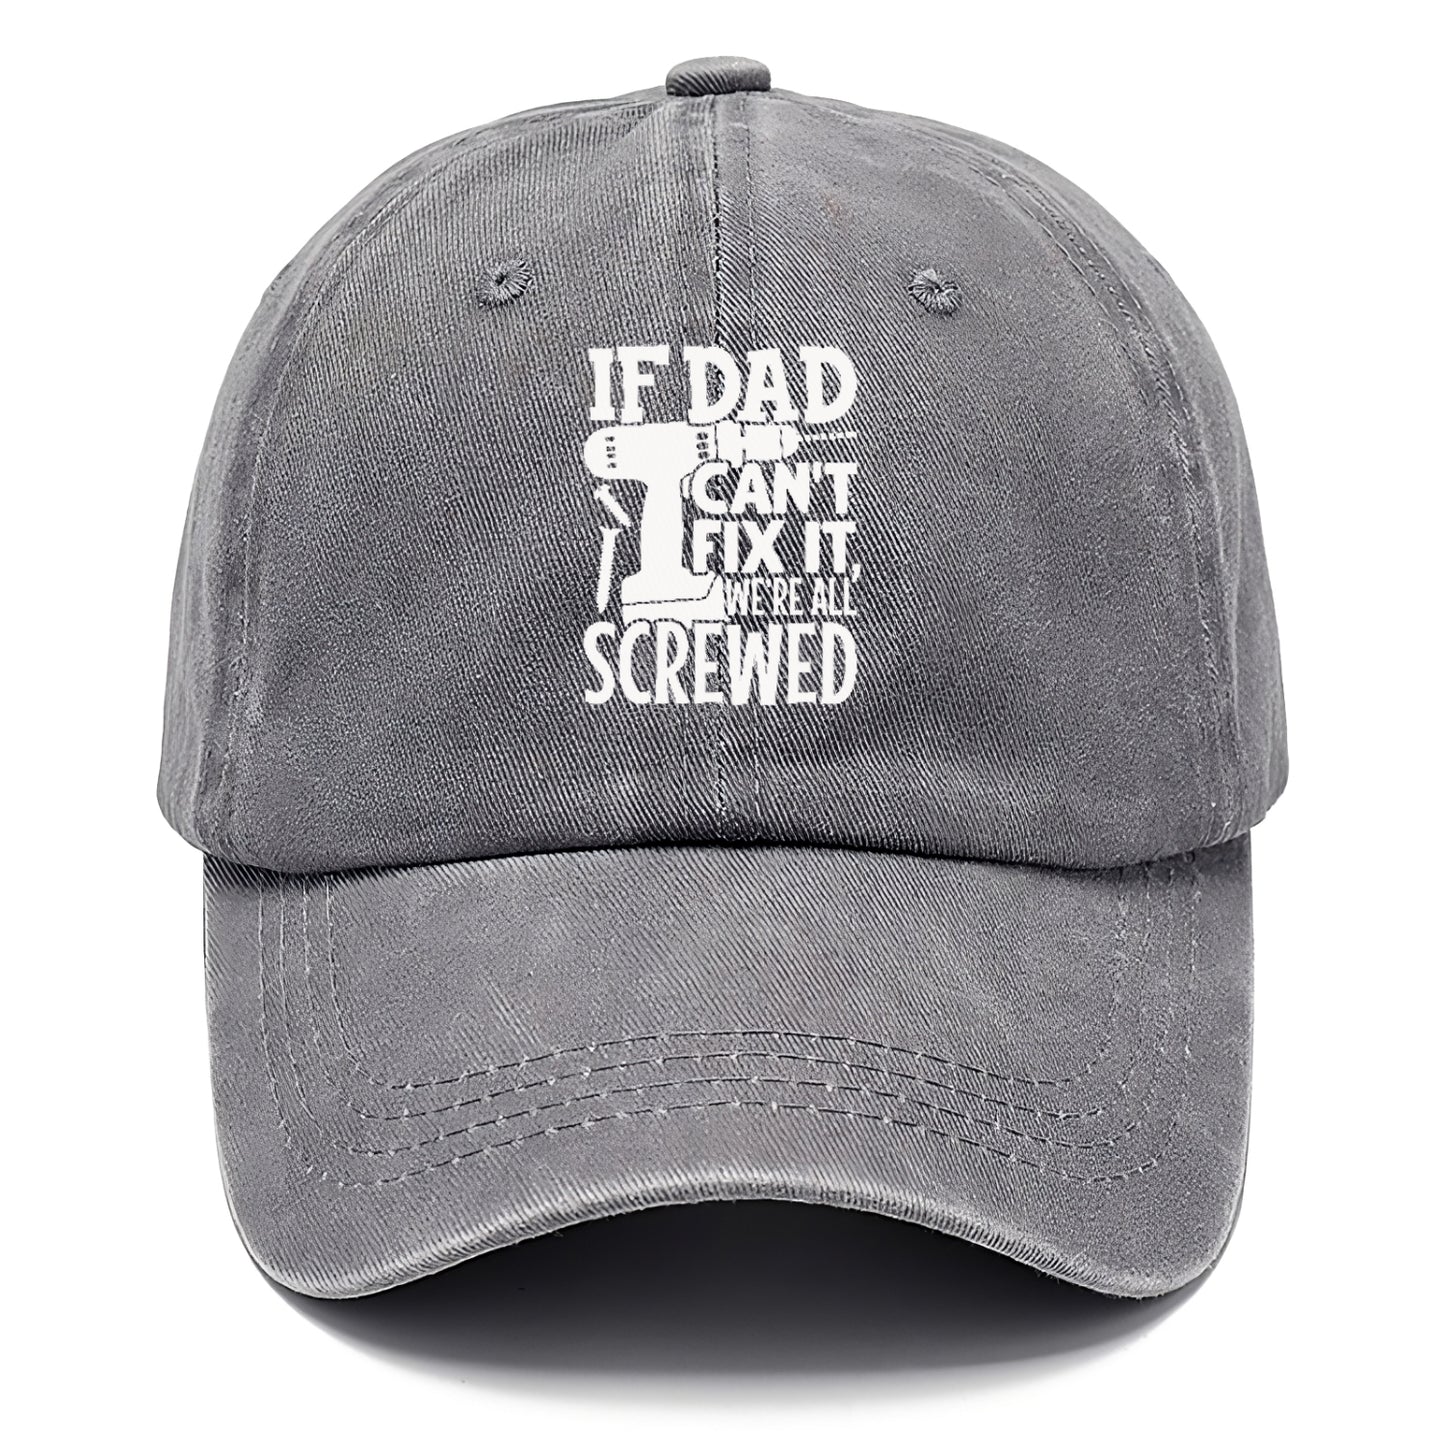 If Dad Can't Fix It We're All Screwed Hat